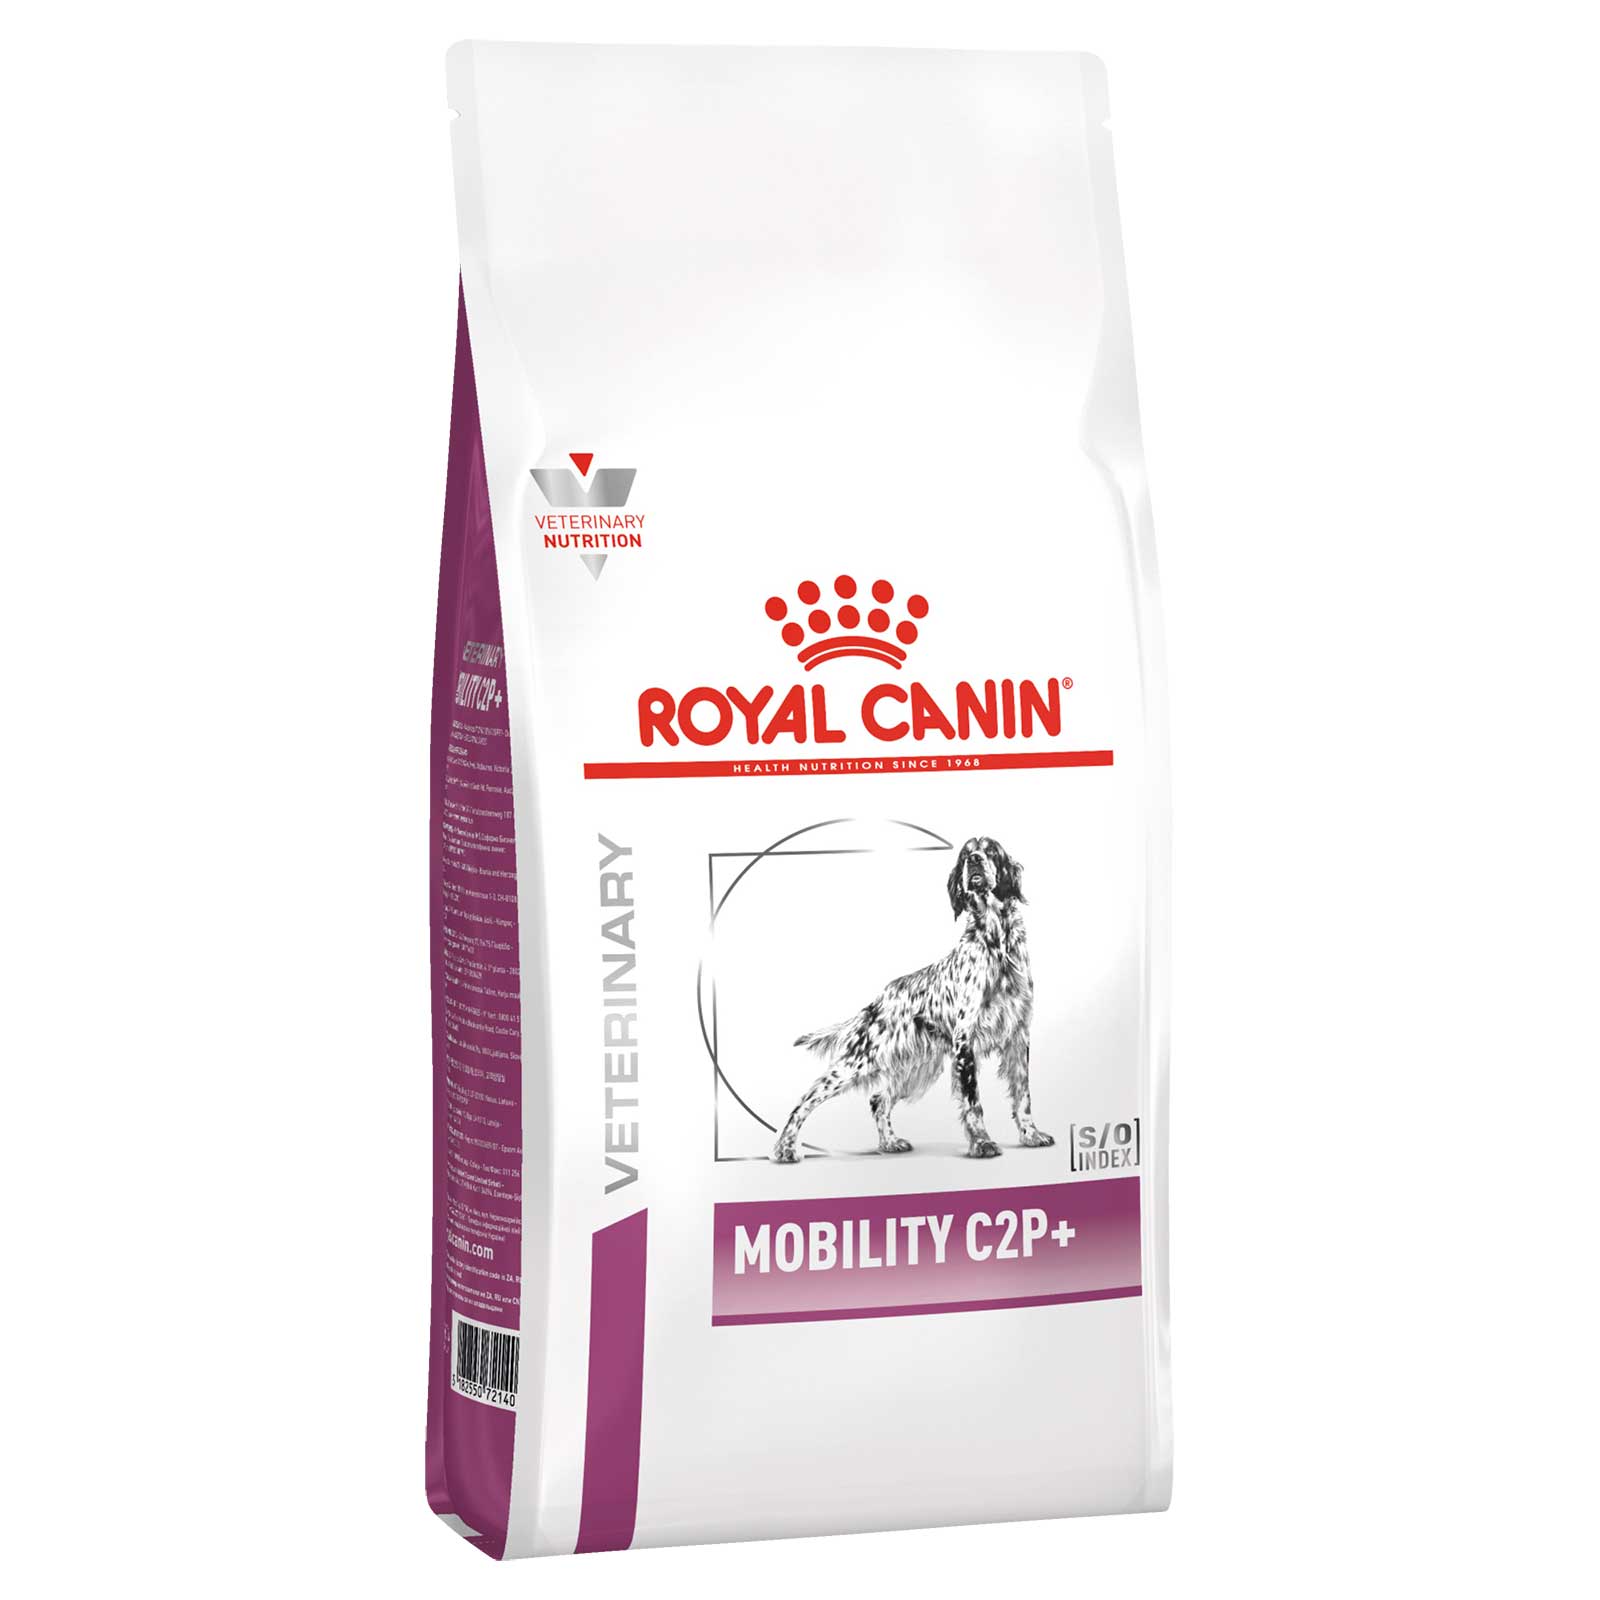 Royal Canin Veterinary Dog Food Mobility C2P+